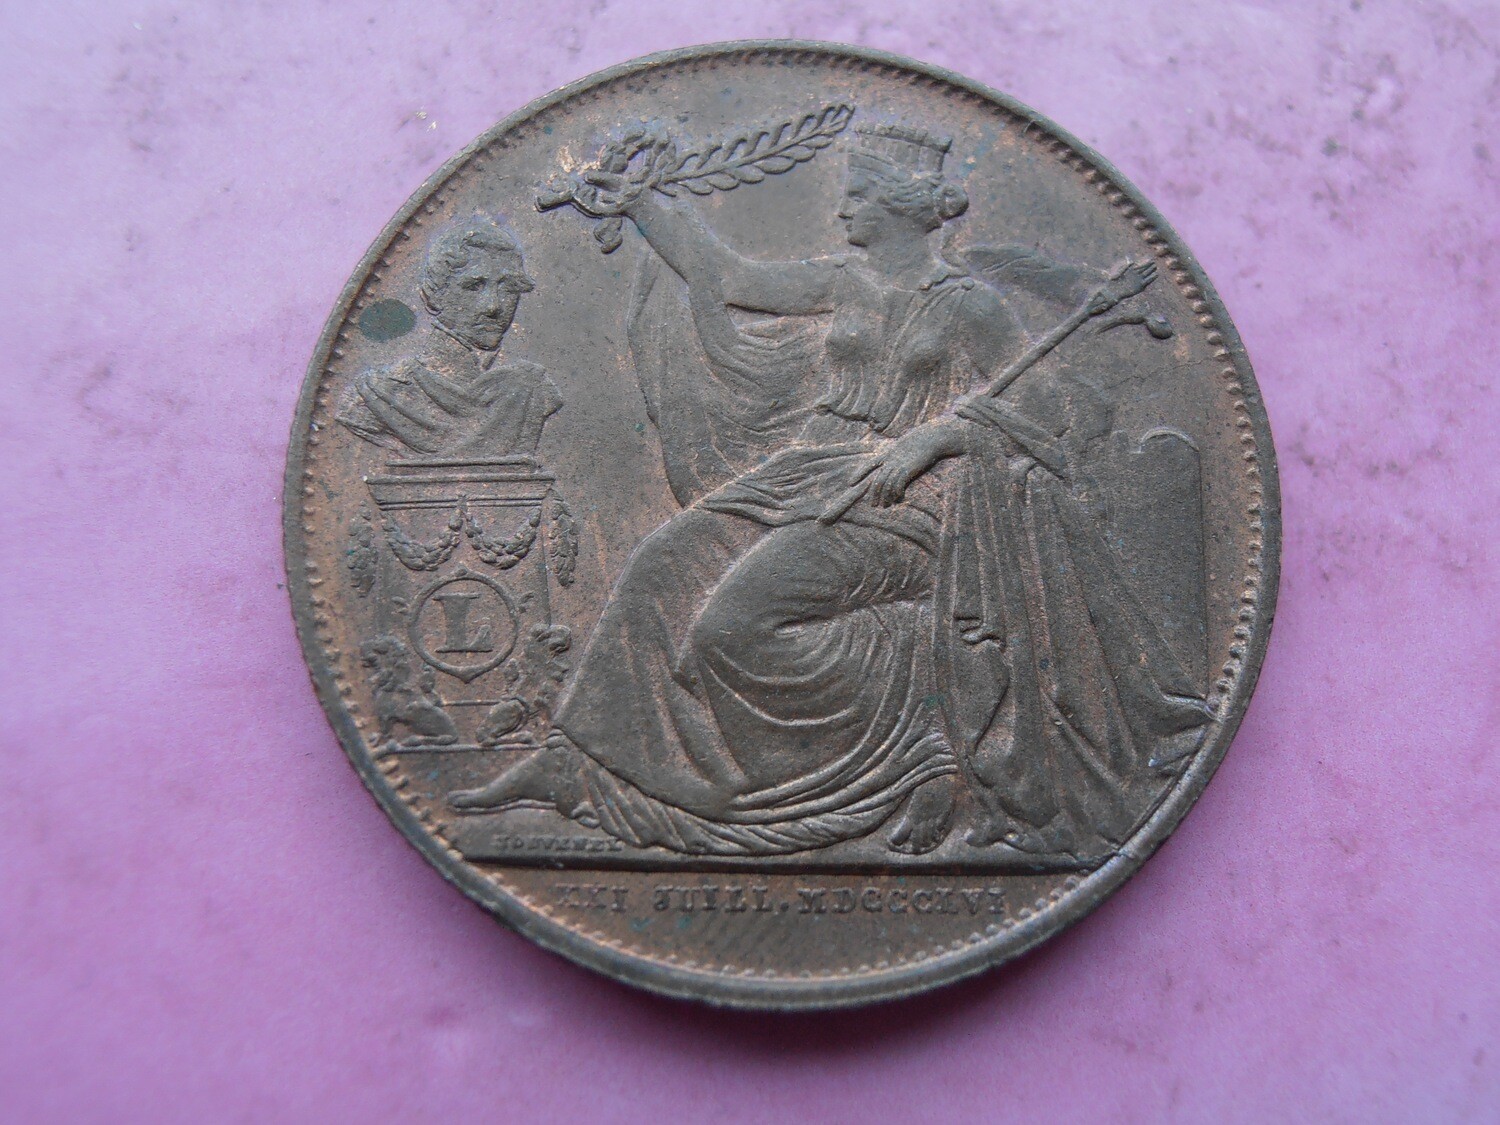 Belgium 1856 bronze medal Léopold I - 25th Anniversary Inauguration of the King